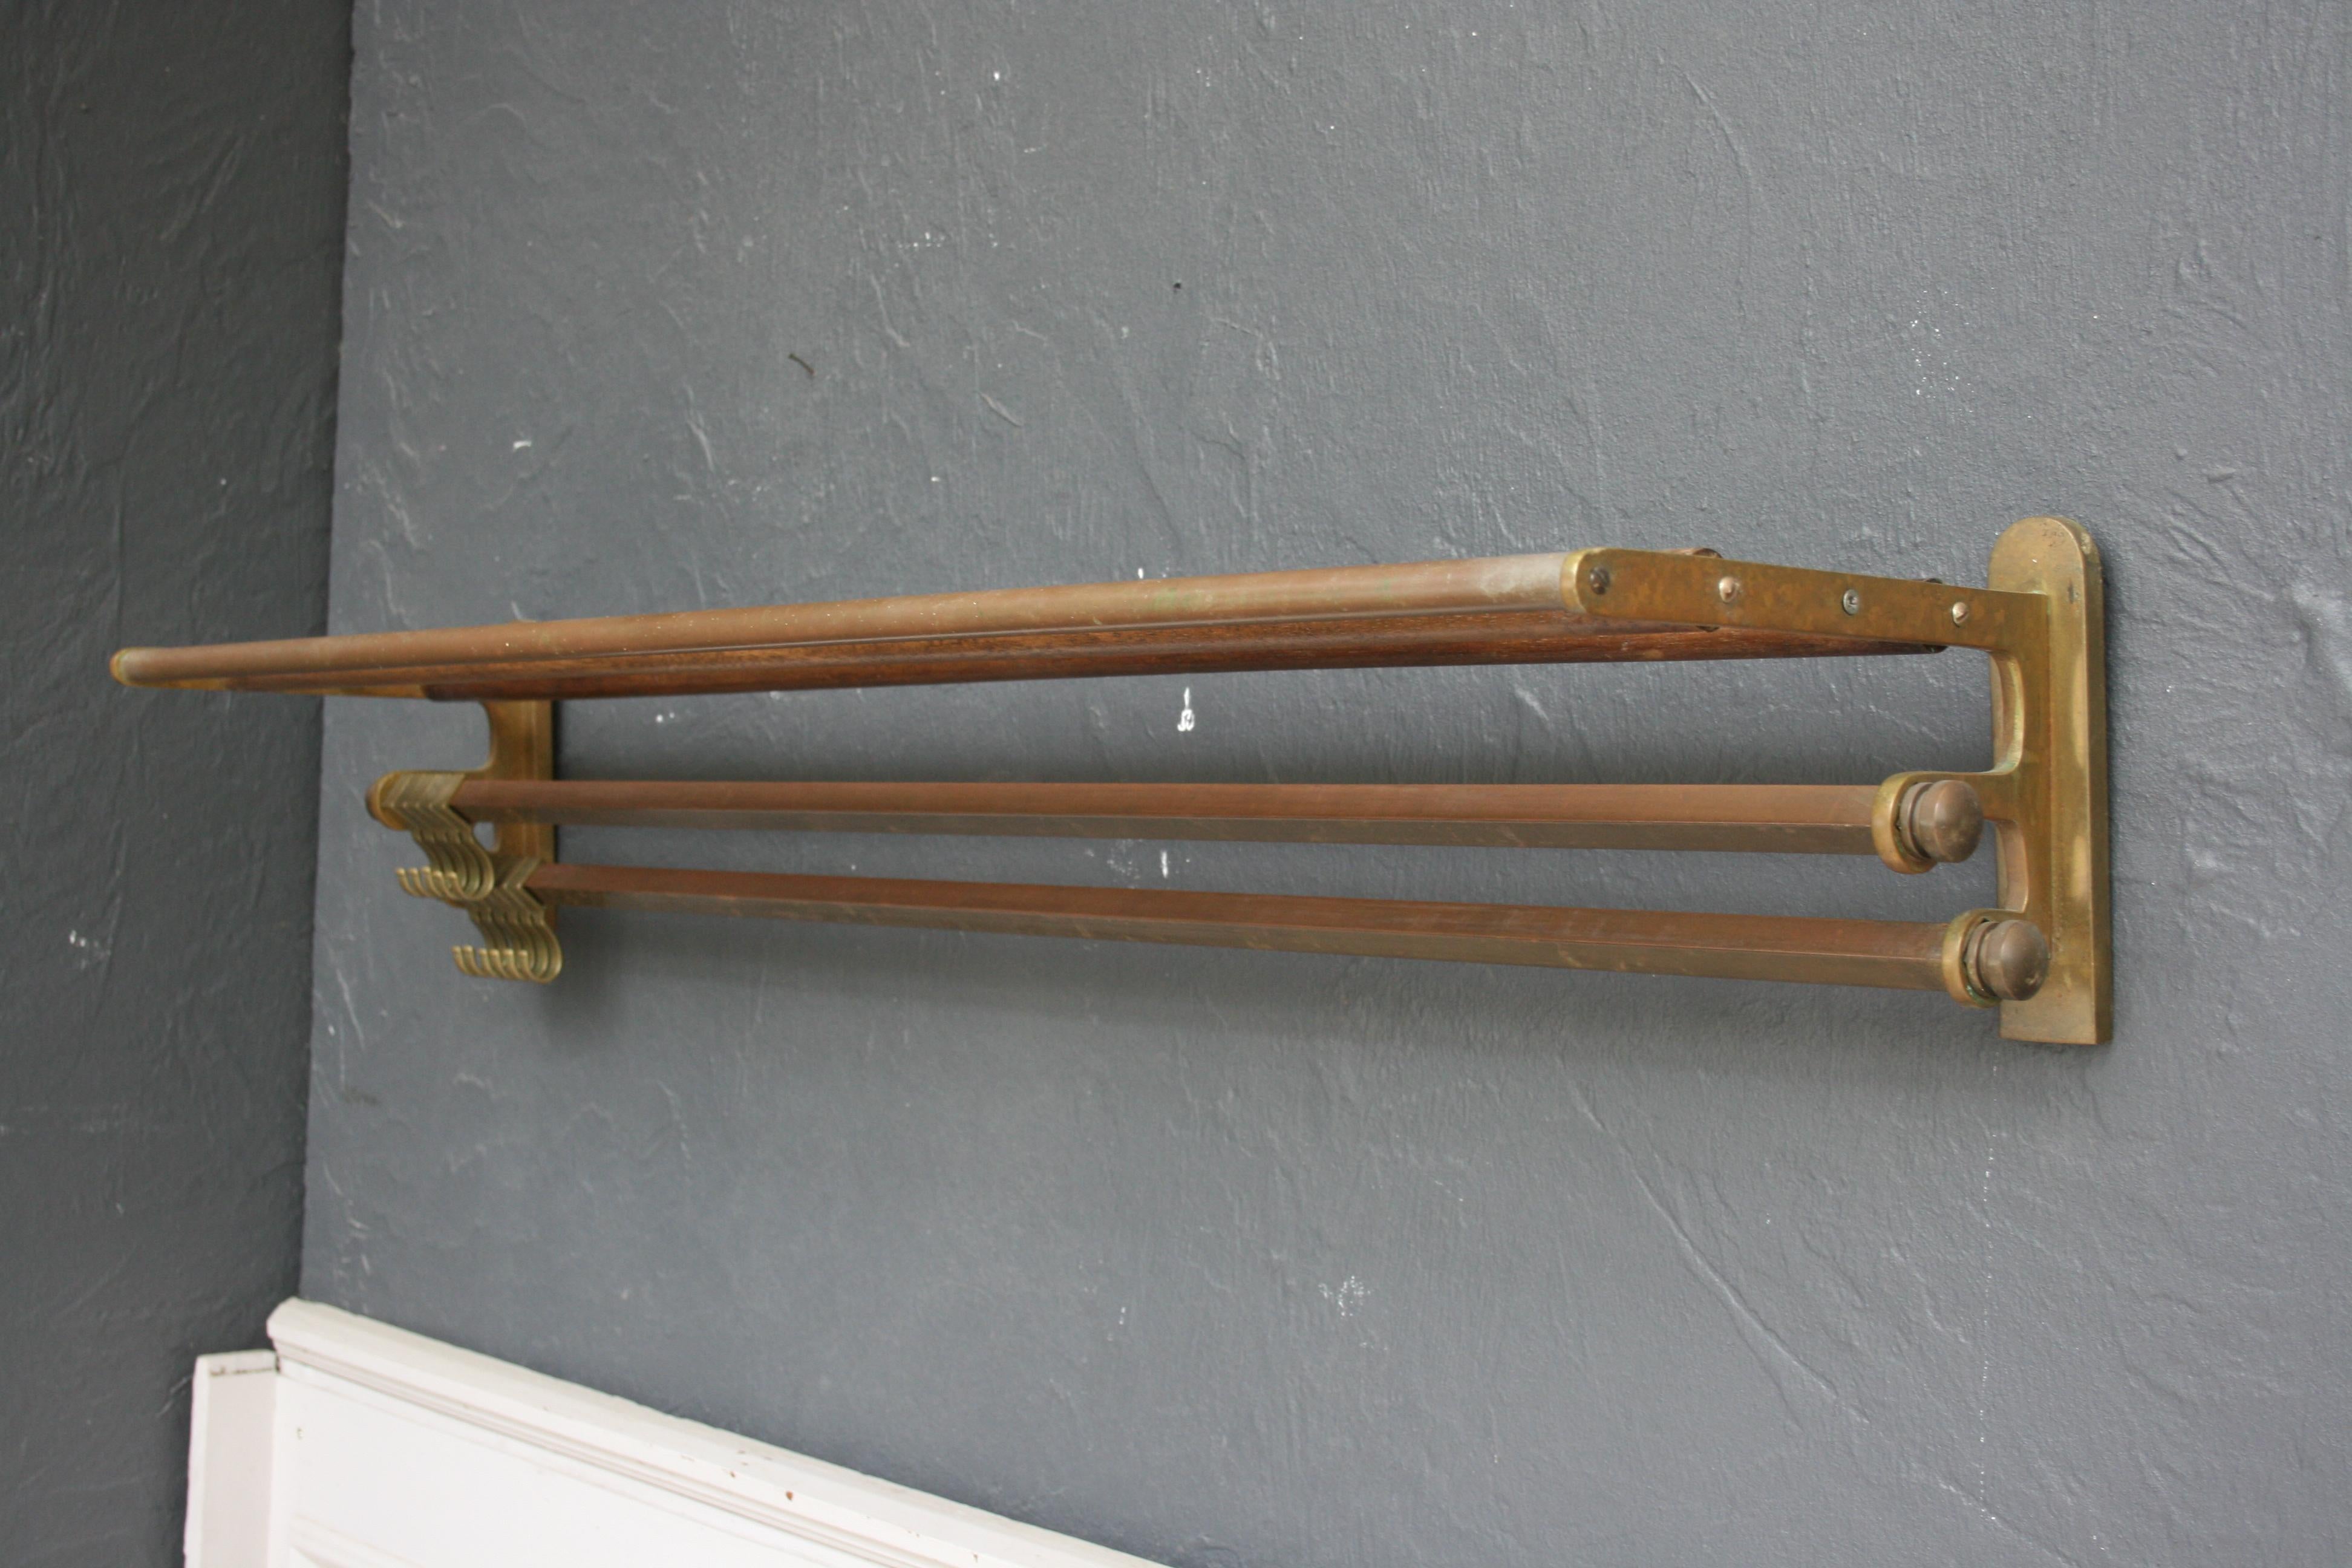 French Art Deco brass rack with a total of 11 moveable hooks on 2 rails and hat shelf, circa from the 1920s.
2 bars of the hat shelf were replaced by wooden bars (see pictures).

Dimensions:
17 cm high / 6,69 inch high,
99 cm wide / 38,97 inch